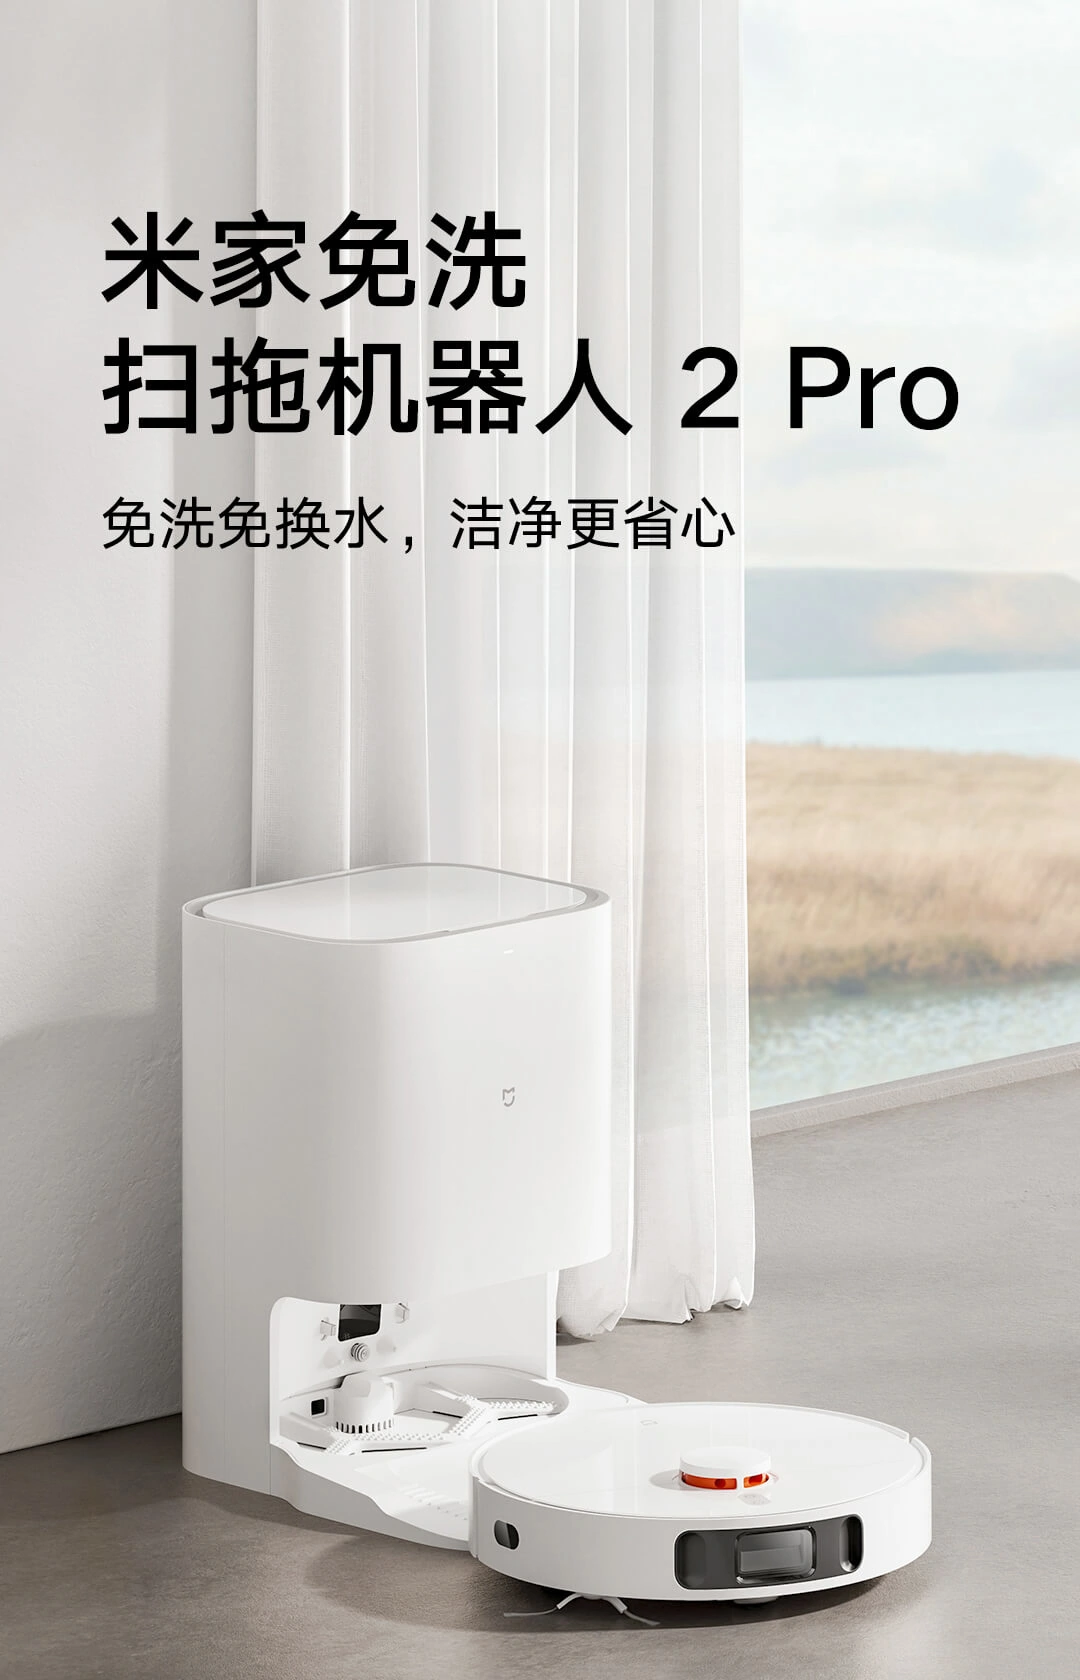 Mijia Cleaning and Mopping Robot 2 Pro